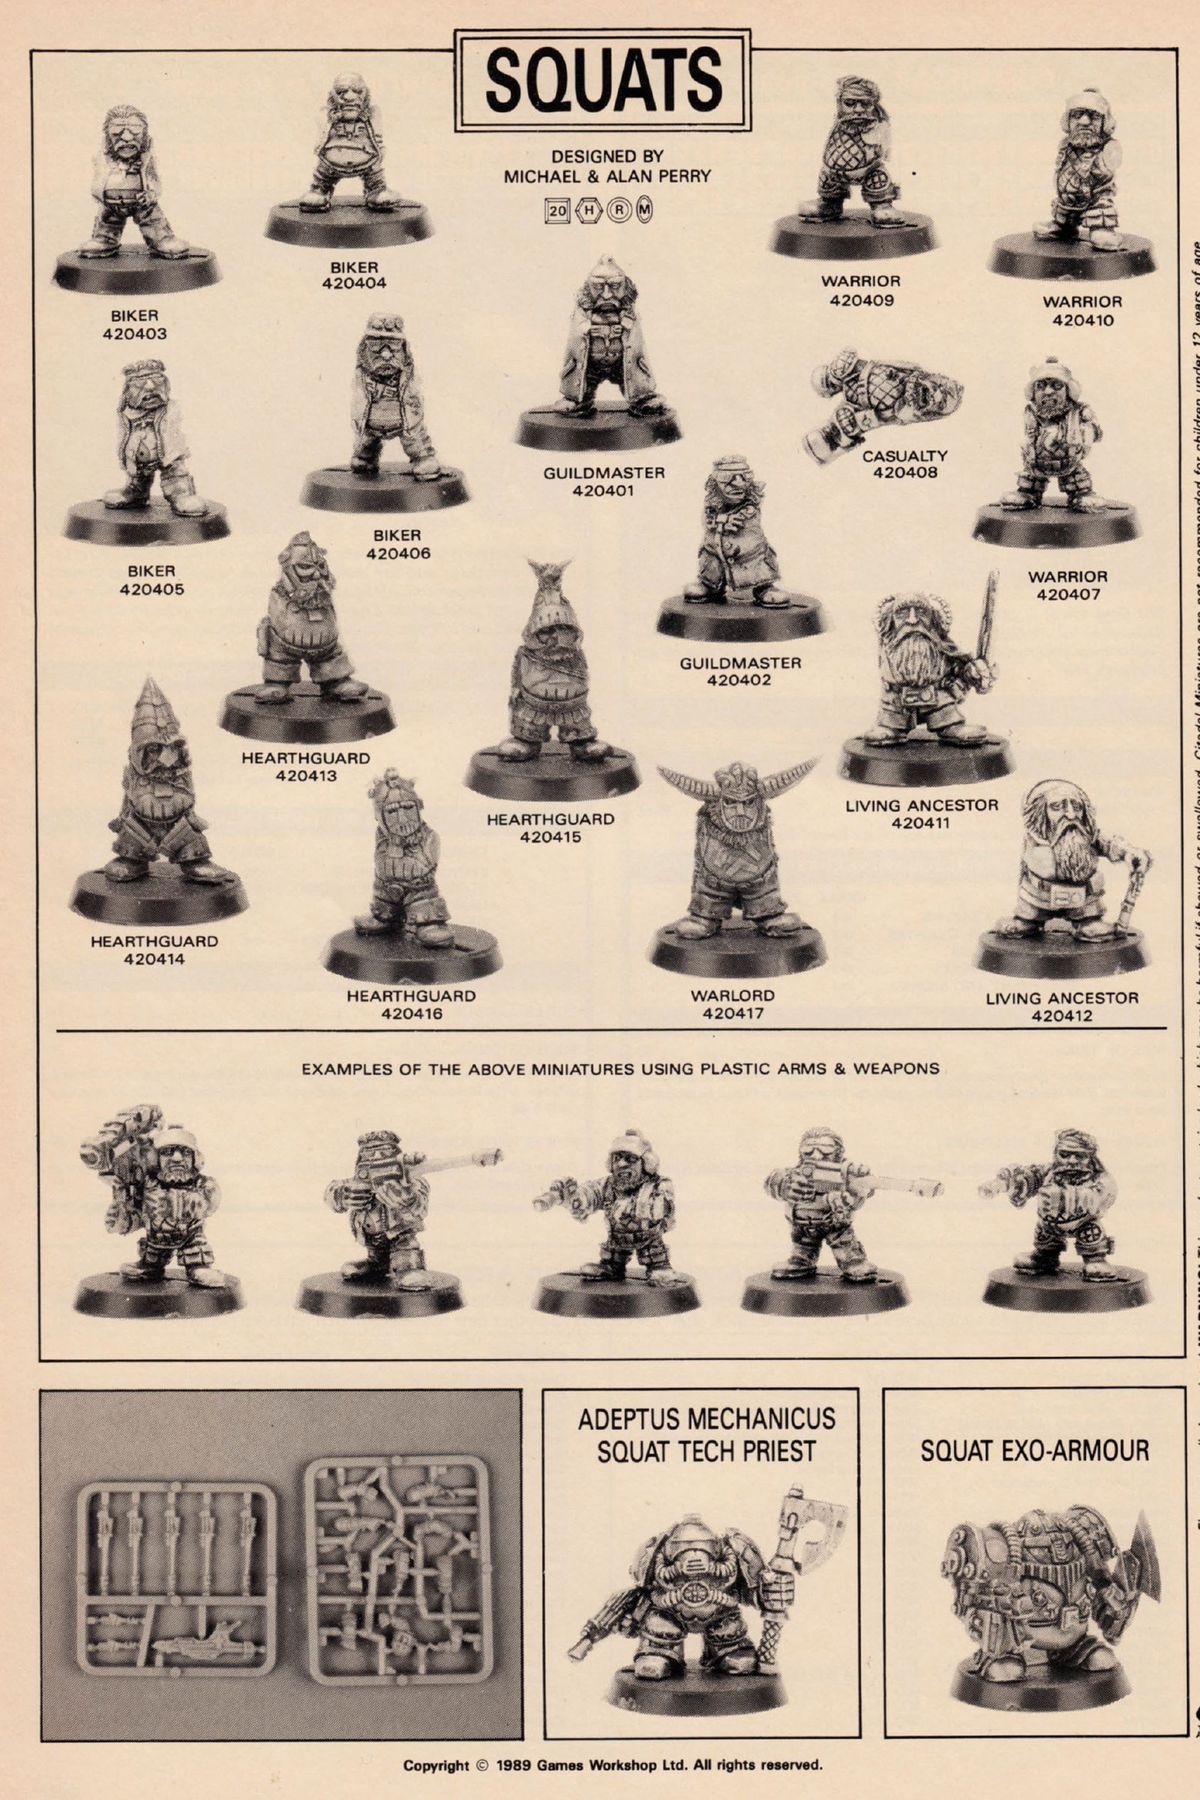 A page from White Dwarf 111 showing Squat models to order.